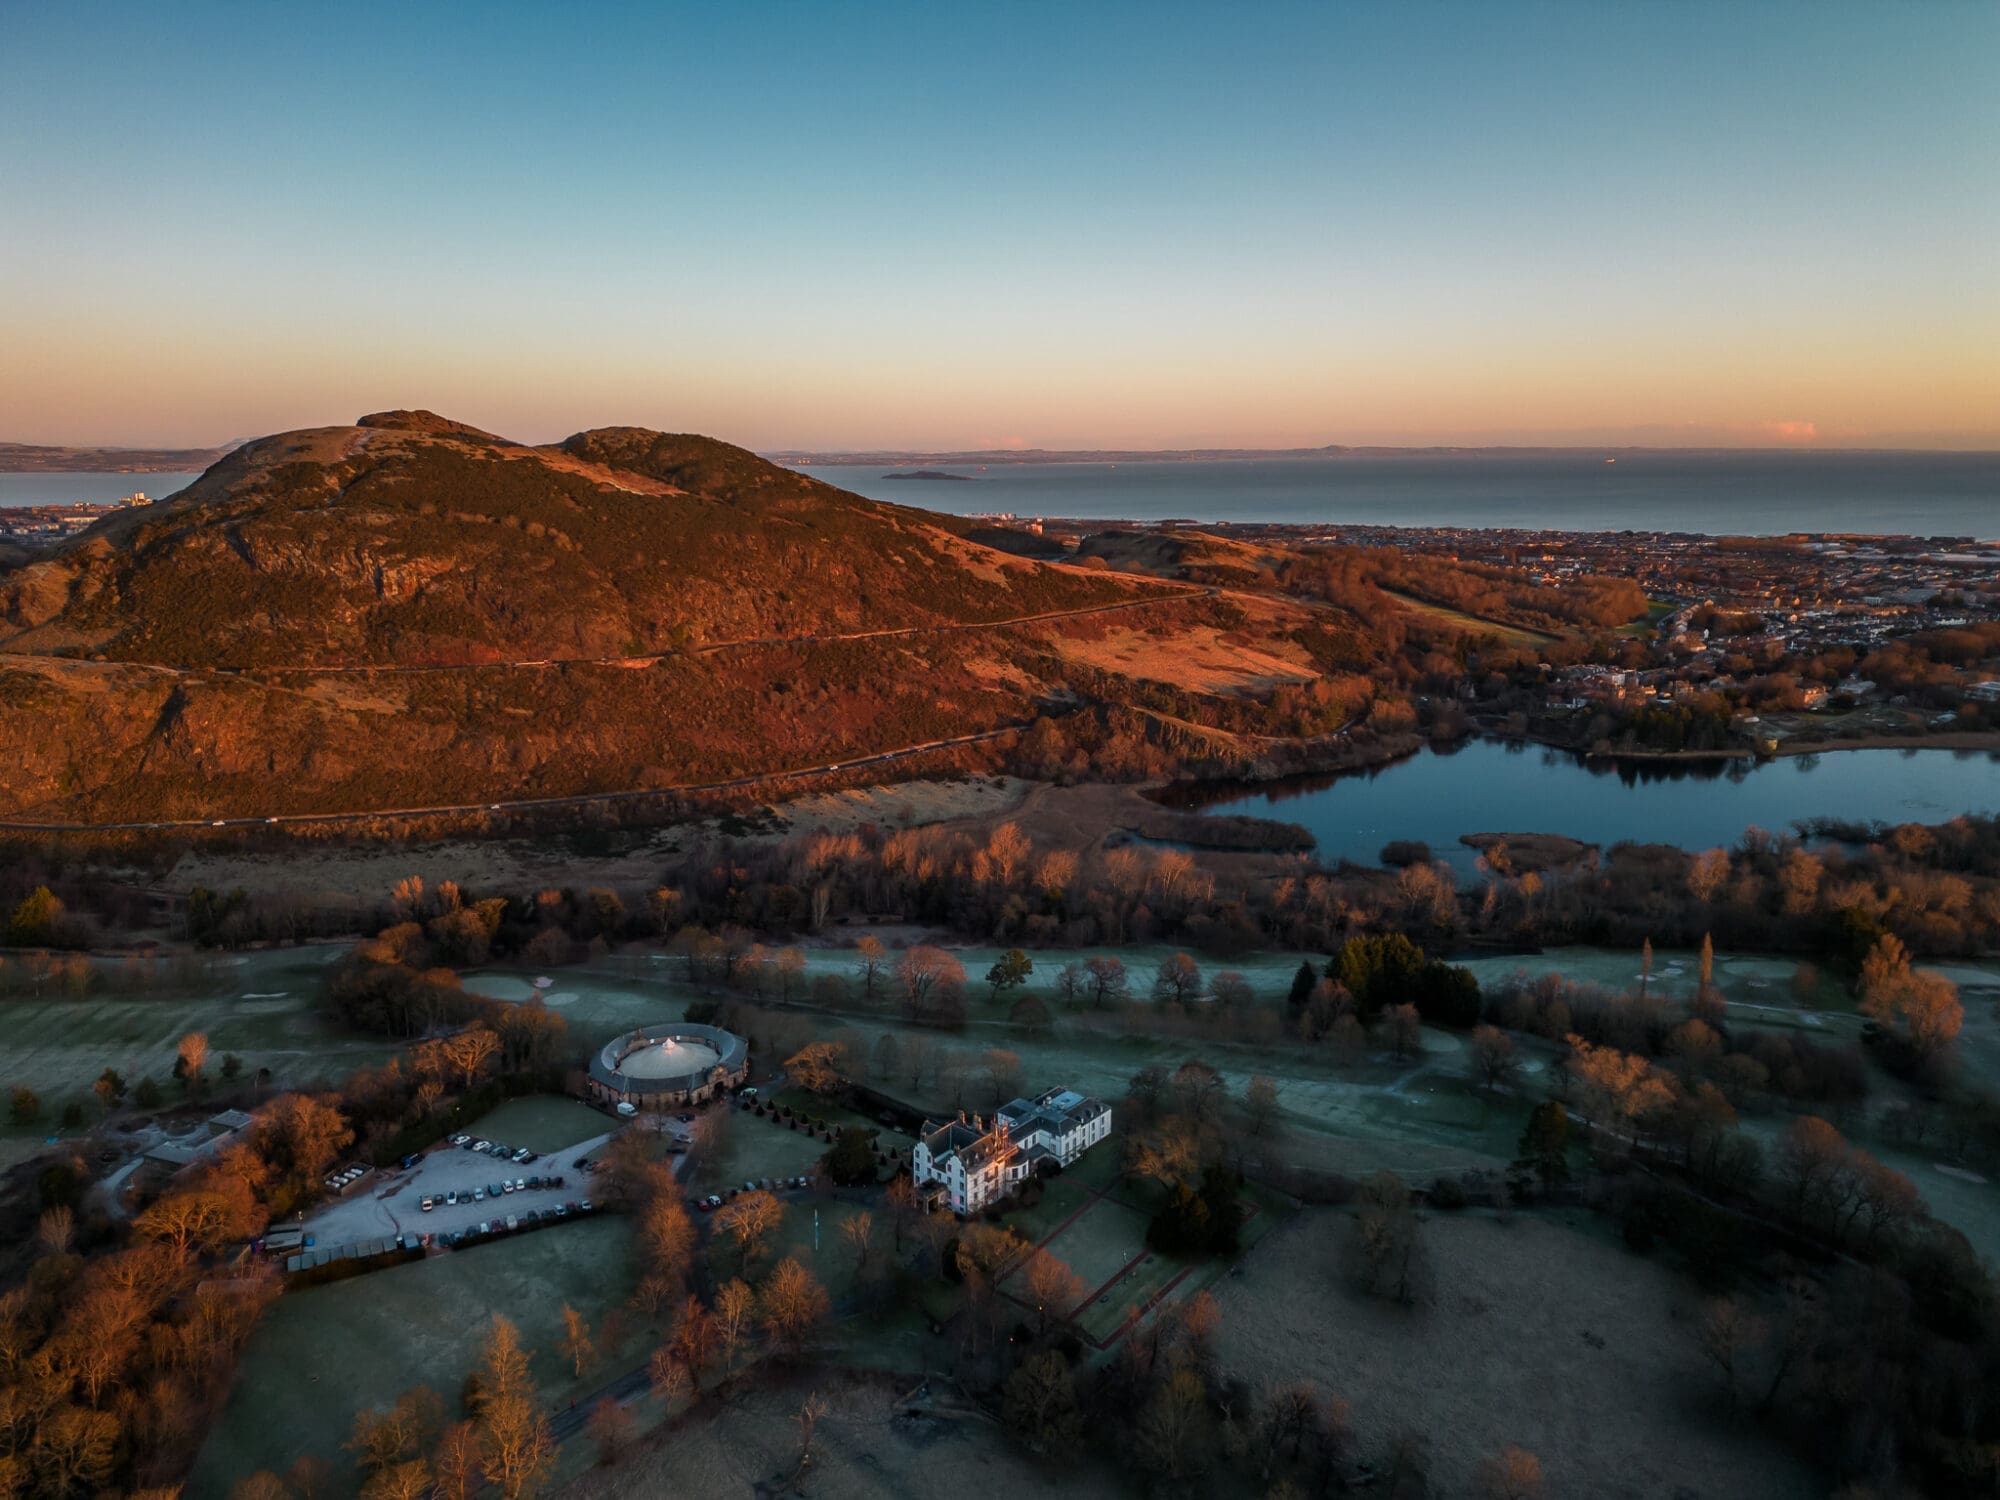 An aerial drone photograph taken over sunrise at Prestonfield House hotel with a view of Arthur's Seat and the sea in the background